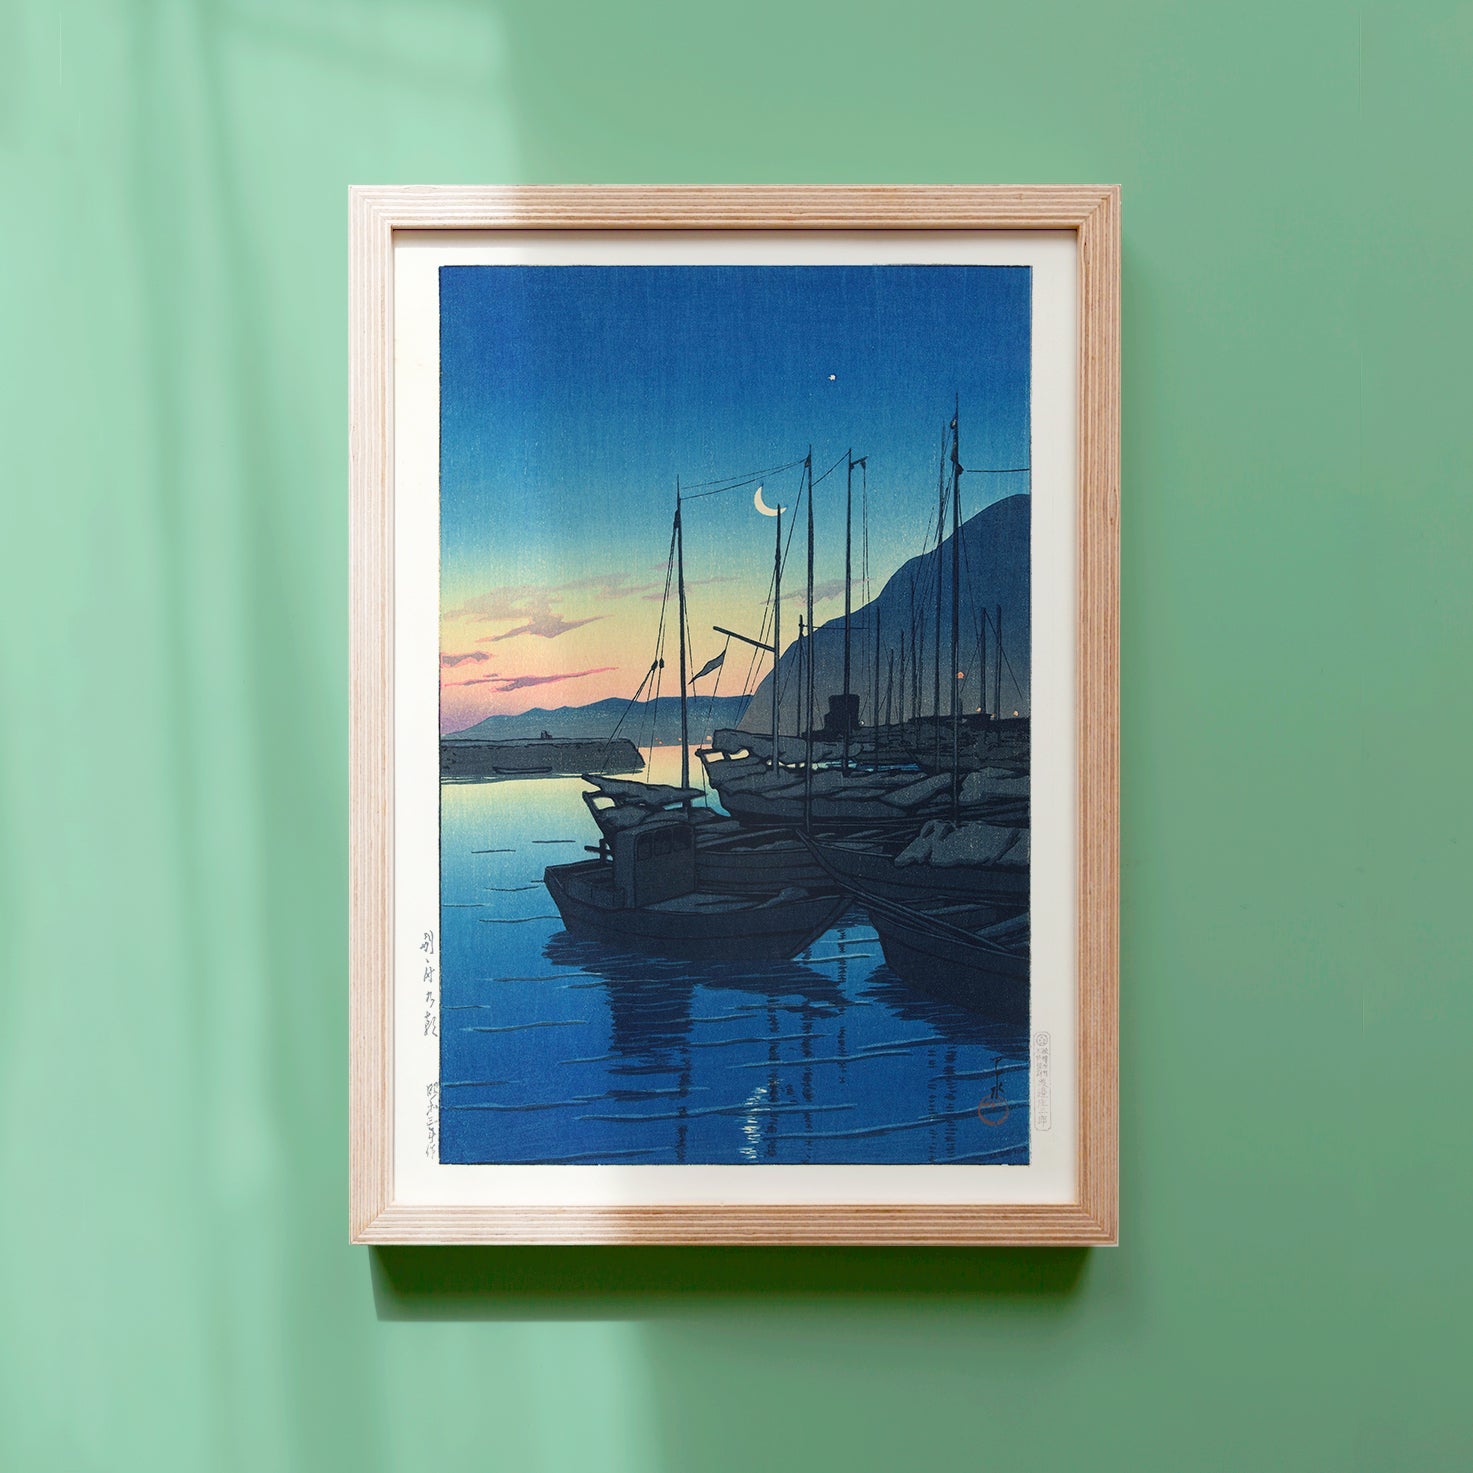 Framed Japanese Art Poster by Kawase Hasui featuring boats in water at morning